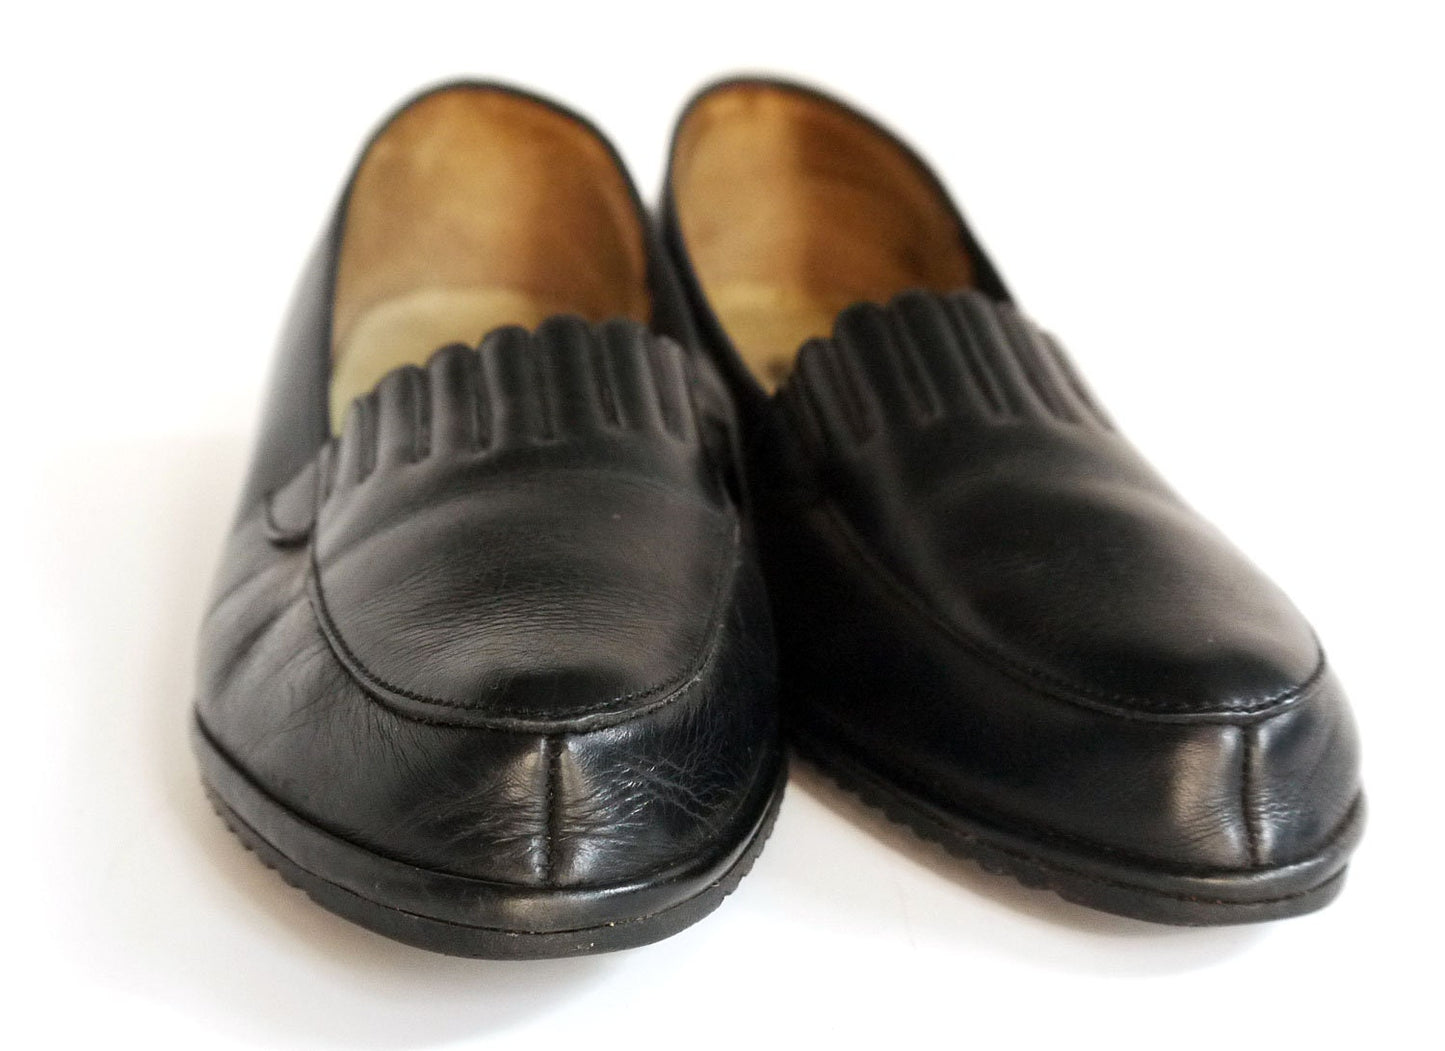 1950s Casual Clarks Clipper Black Crepe Soled Shoes UK 6.5